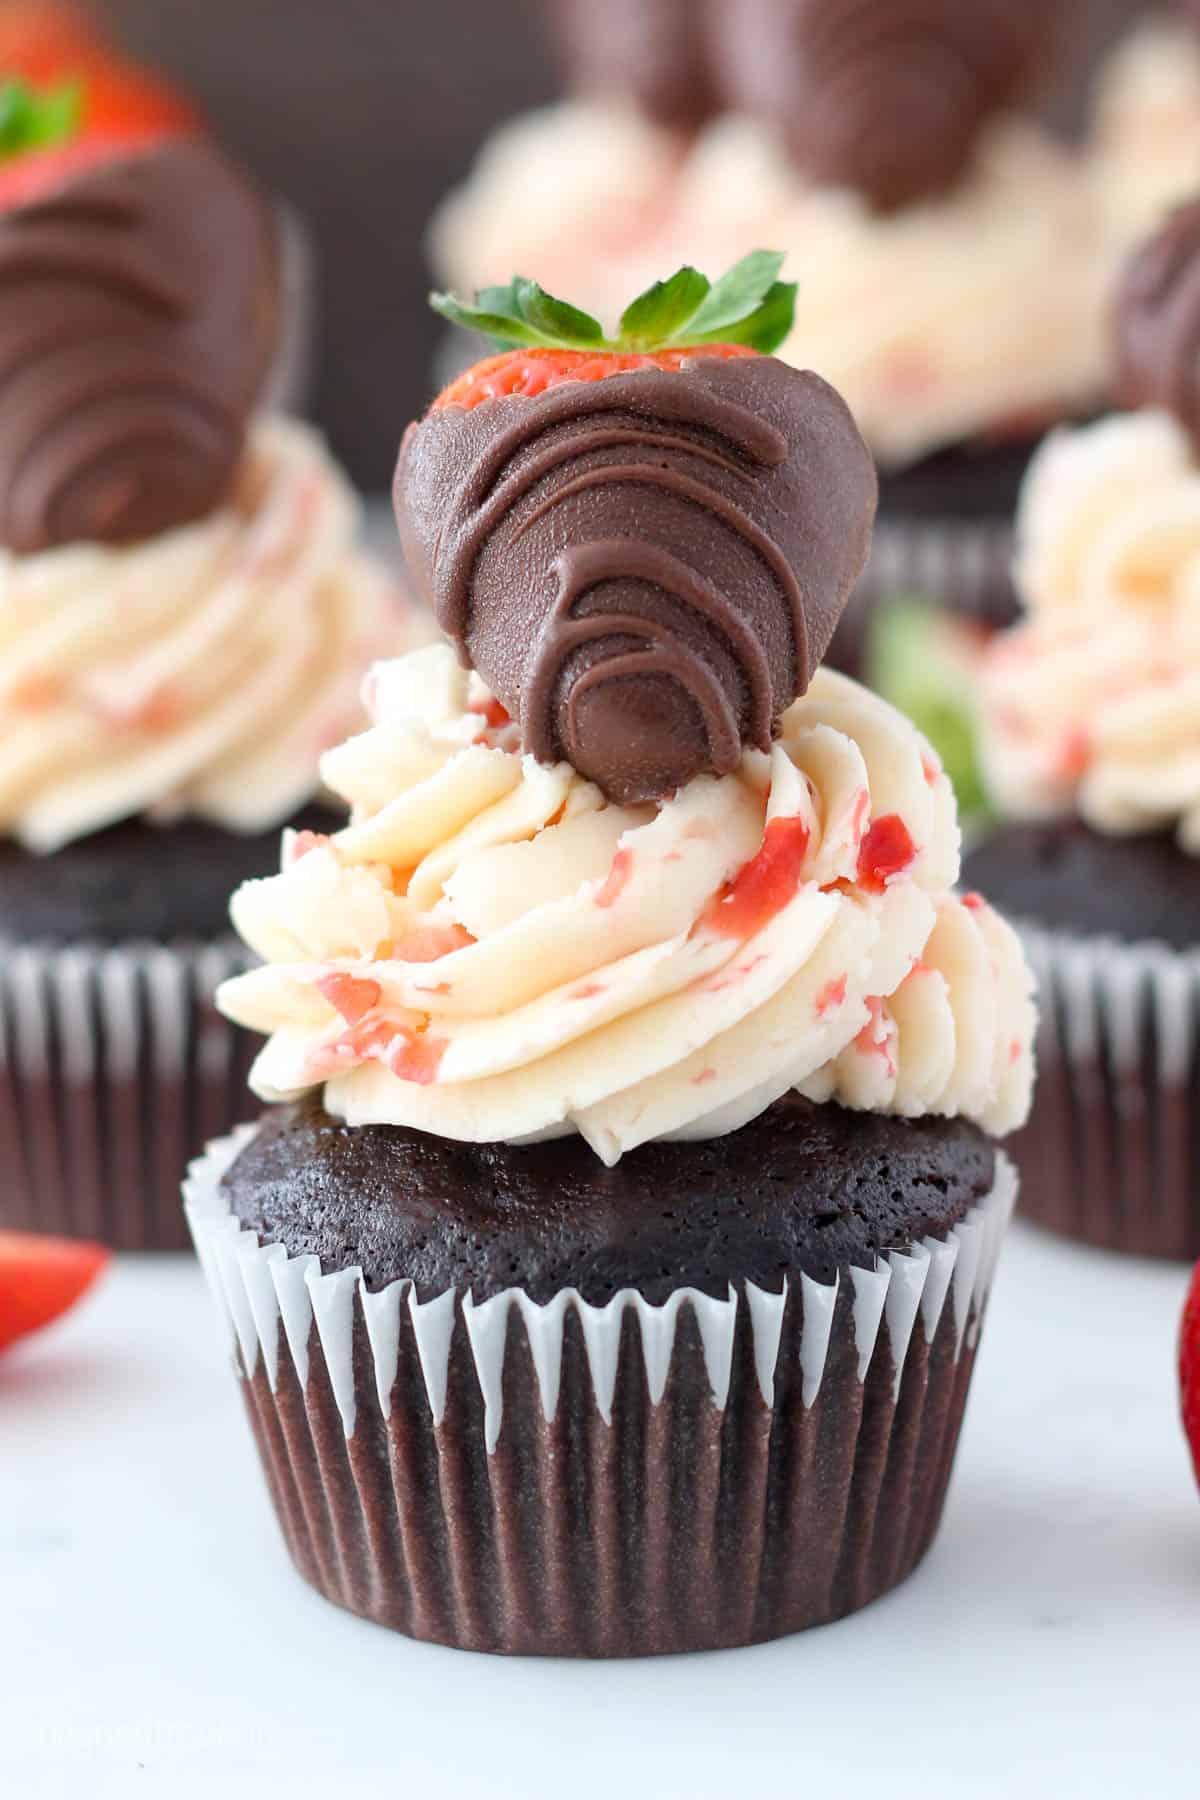 Three chocolate cupcakes covered with fresh strawberry buttercream and they're topped with a chocolate covered strawberry.